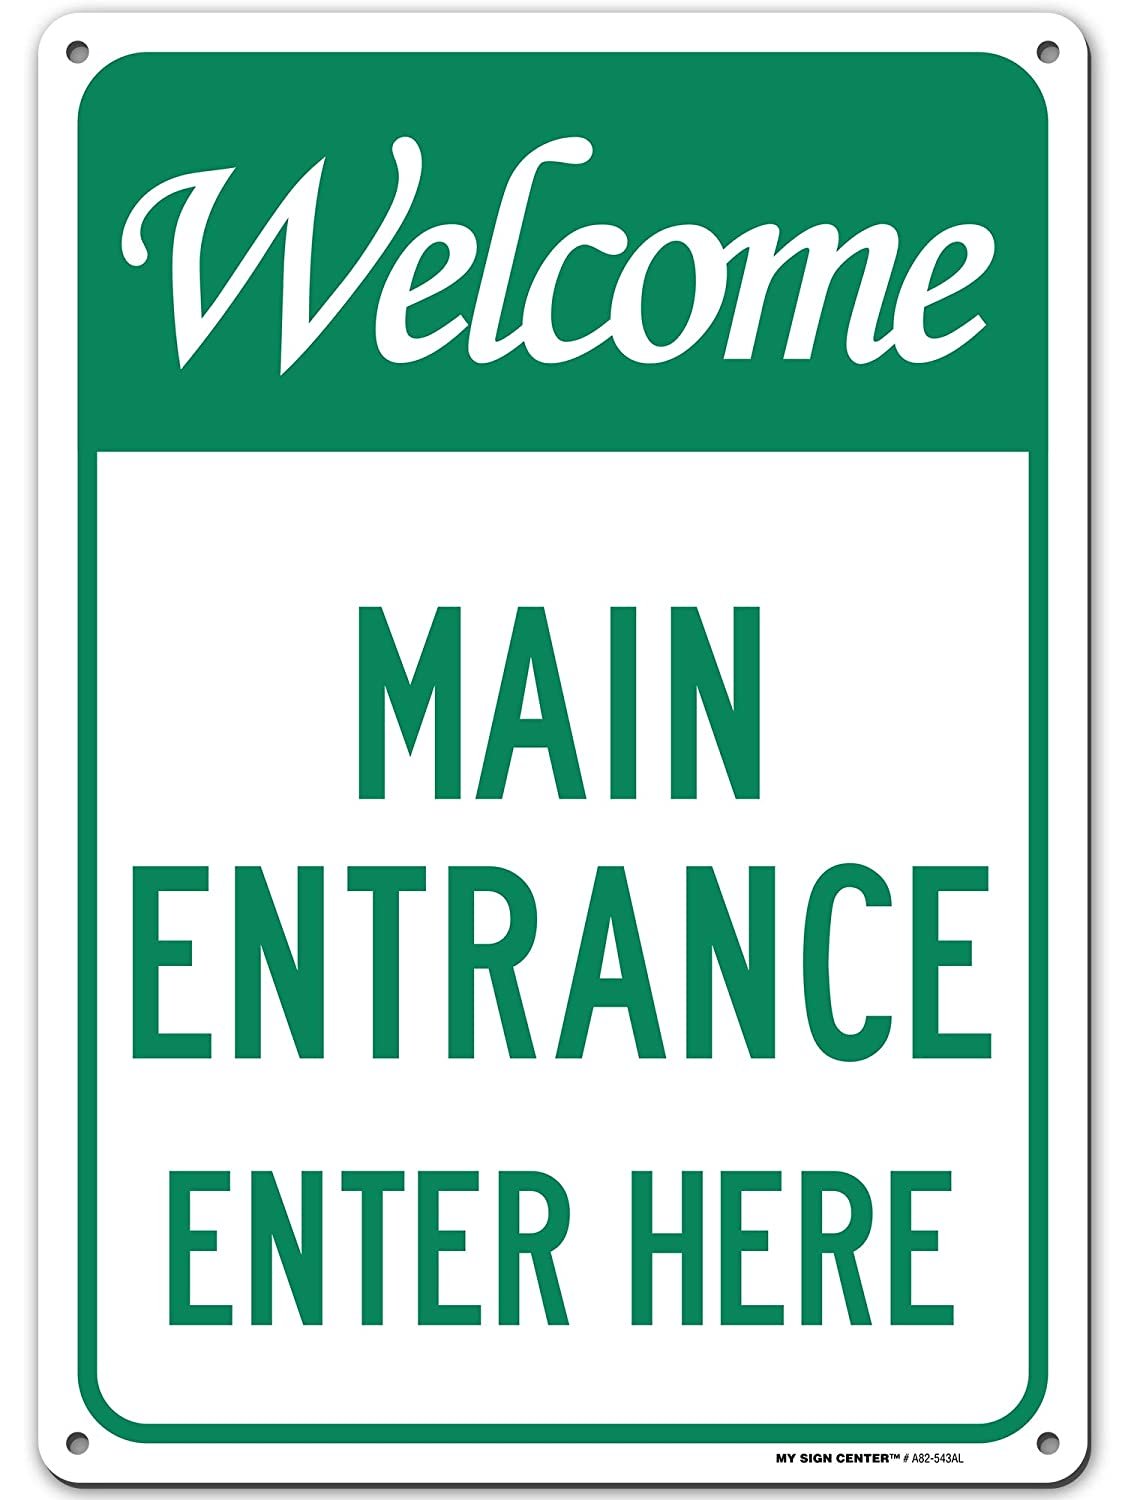 Welcome Main Entrance Enter Here Sign